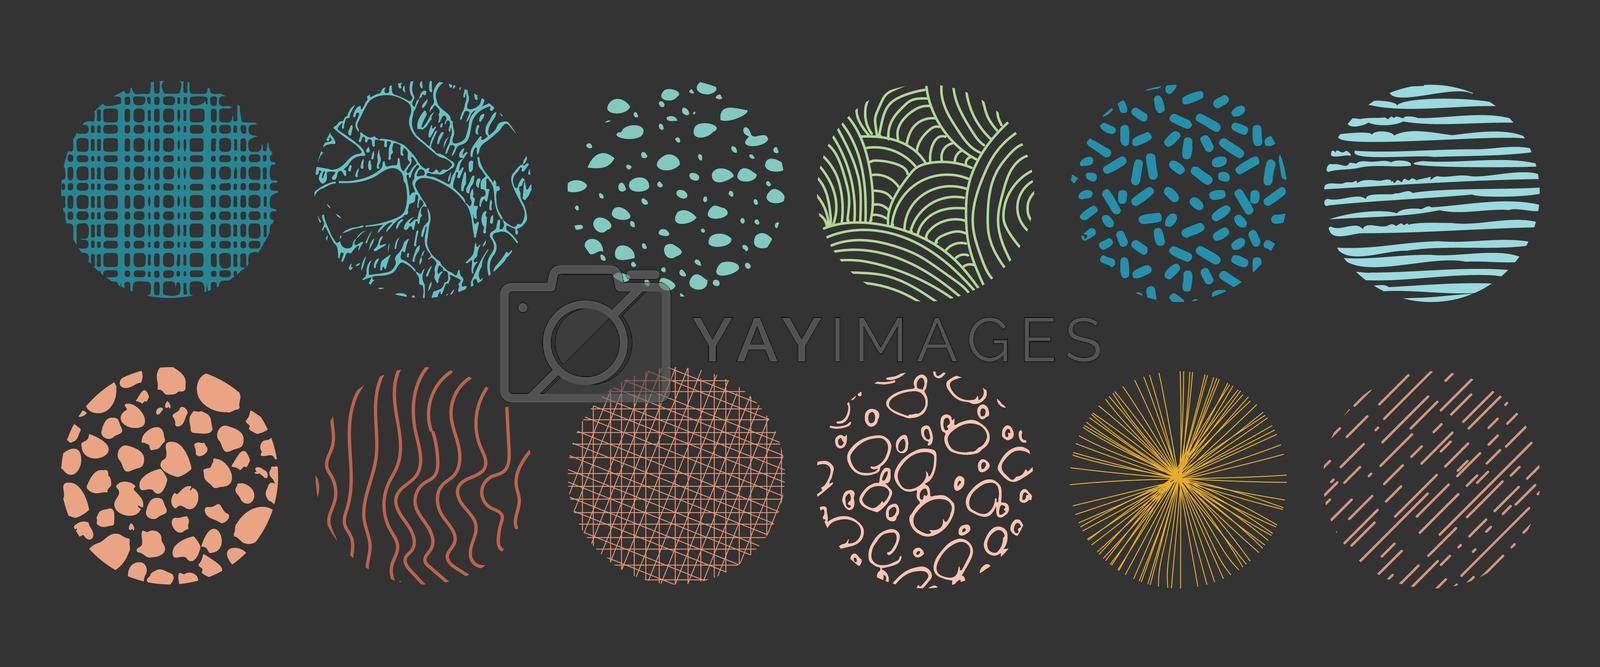 Royalty free image of Set of round Abstract colorful bright Backgrounds hand-drawn doodles by GALA_art